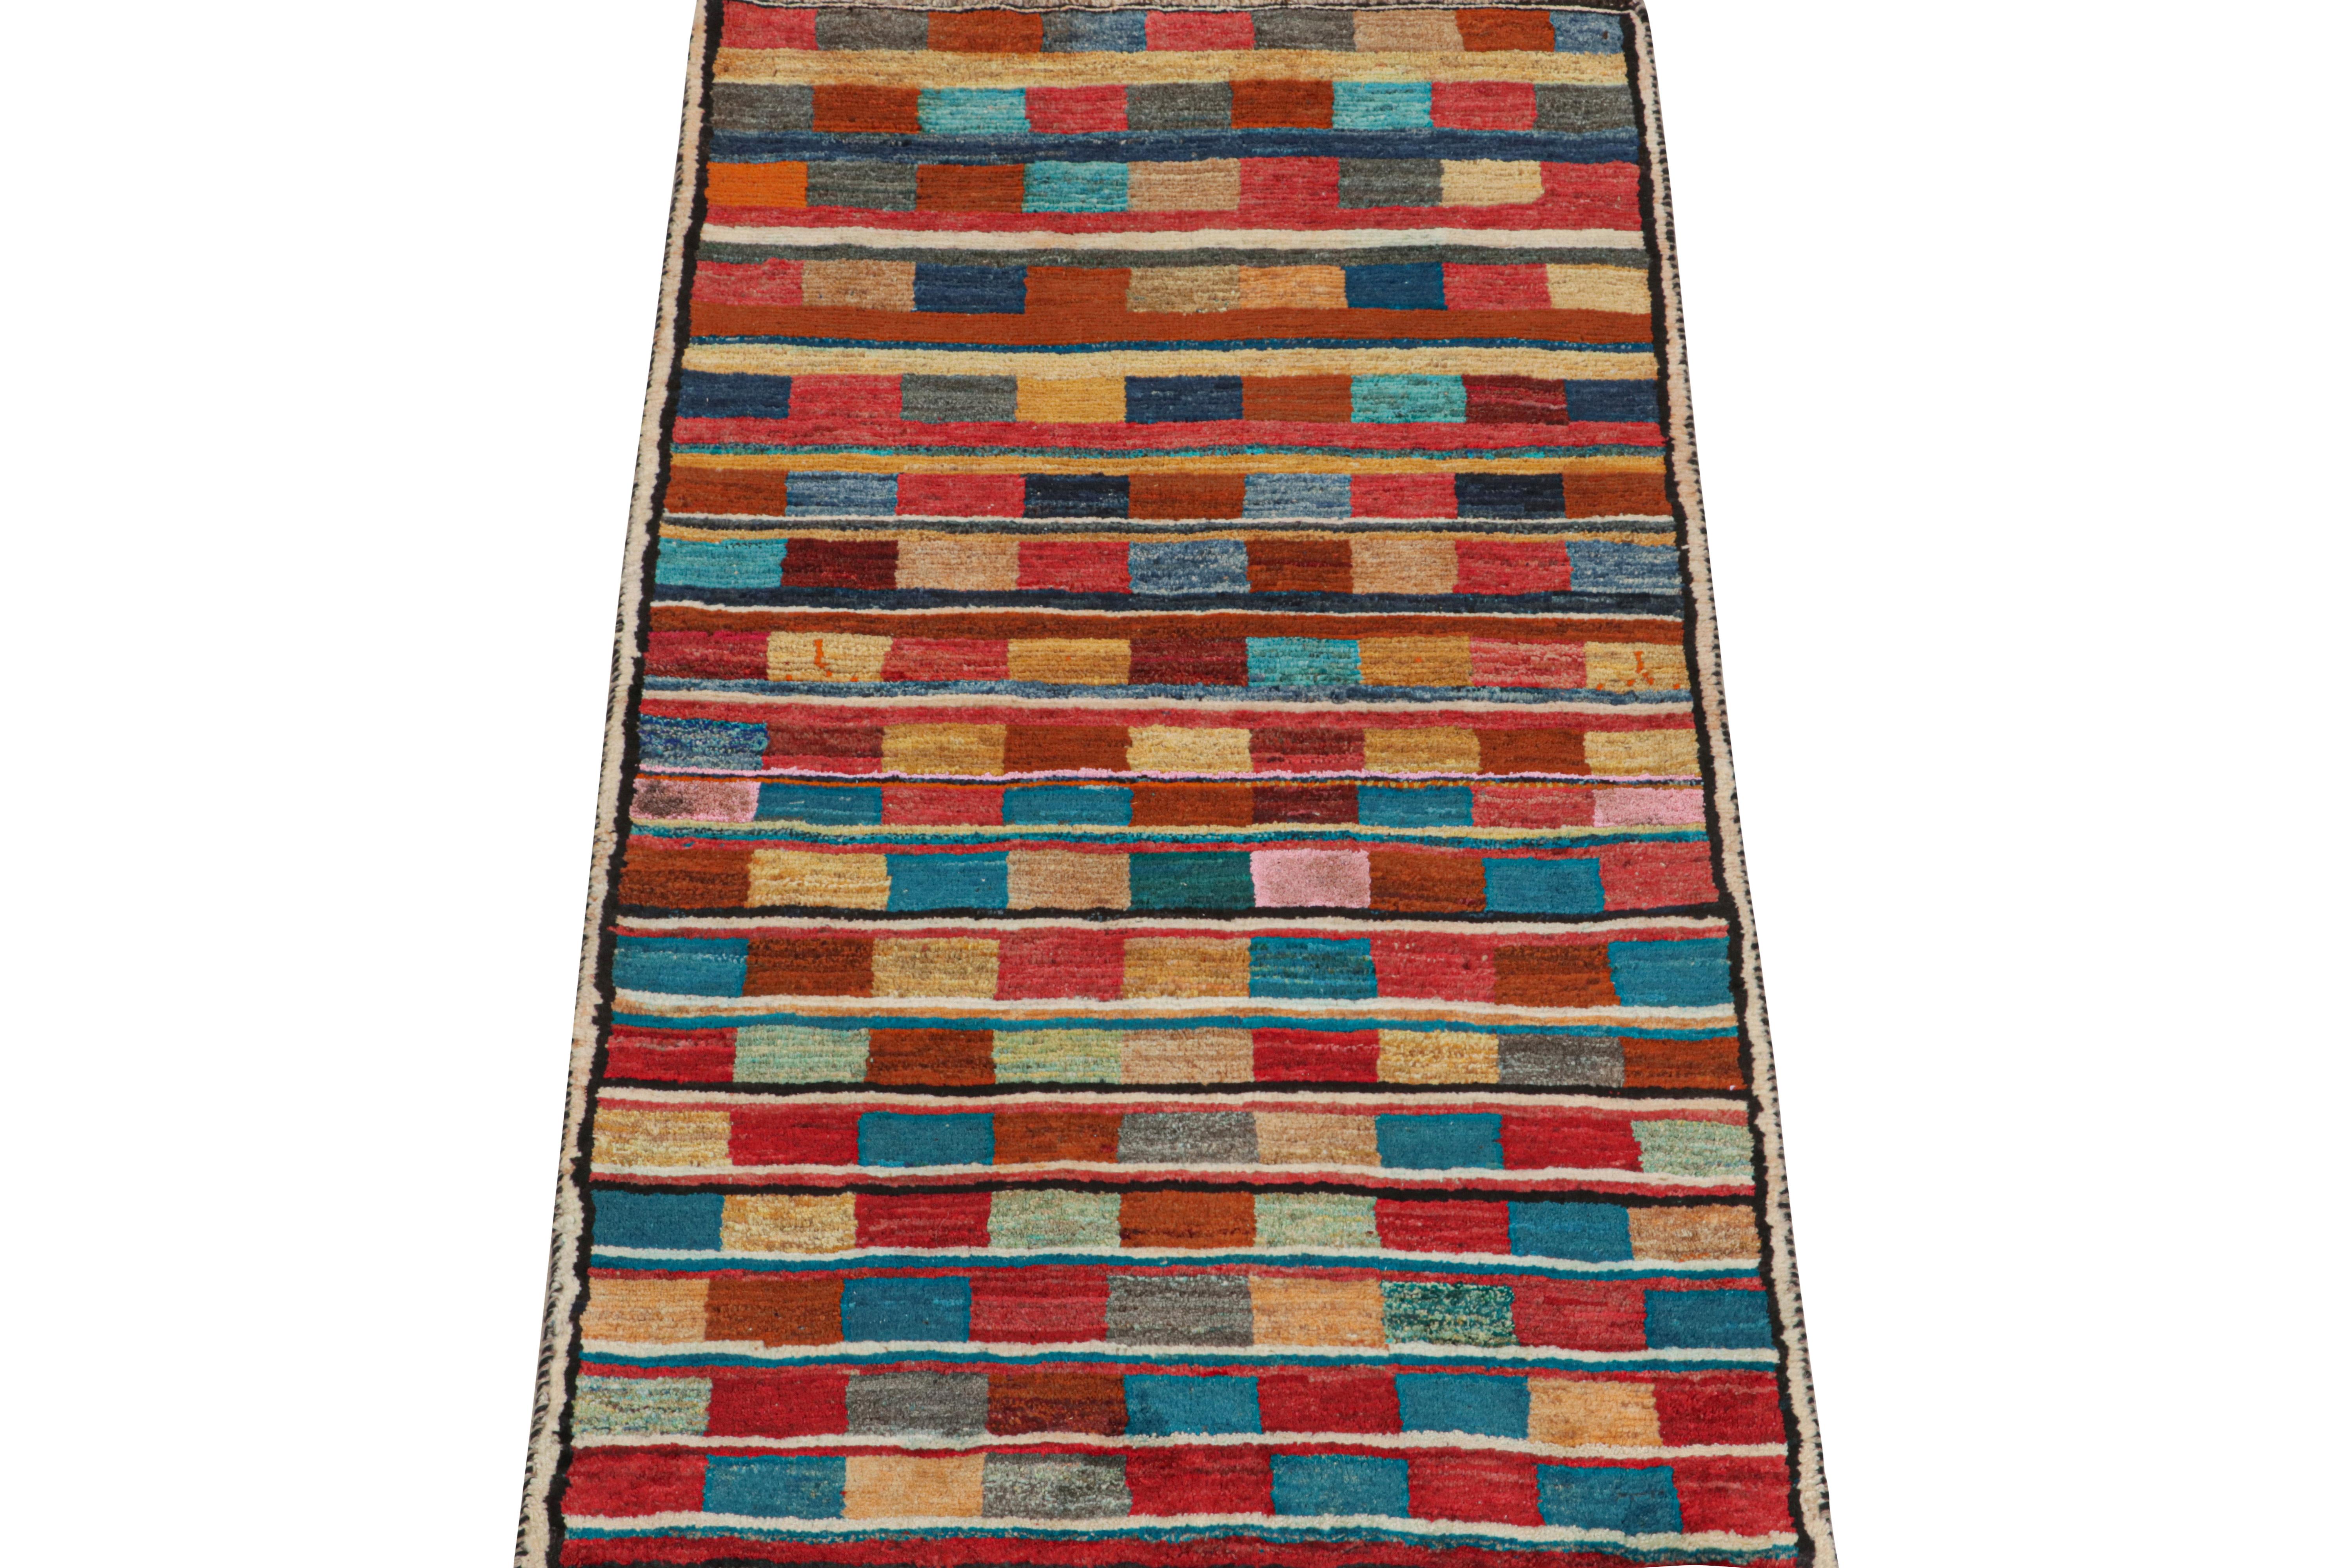 This vintage 3x6 Persian runner is a Gabbeh rug that originates from the Qashqai tribe—hand-knotted in wool circa 1950-1960.

Its geometric pattern of squares and stripes enjoys vibrant polychromatic colors—particularly red, blue, brown, and gold